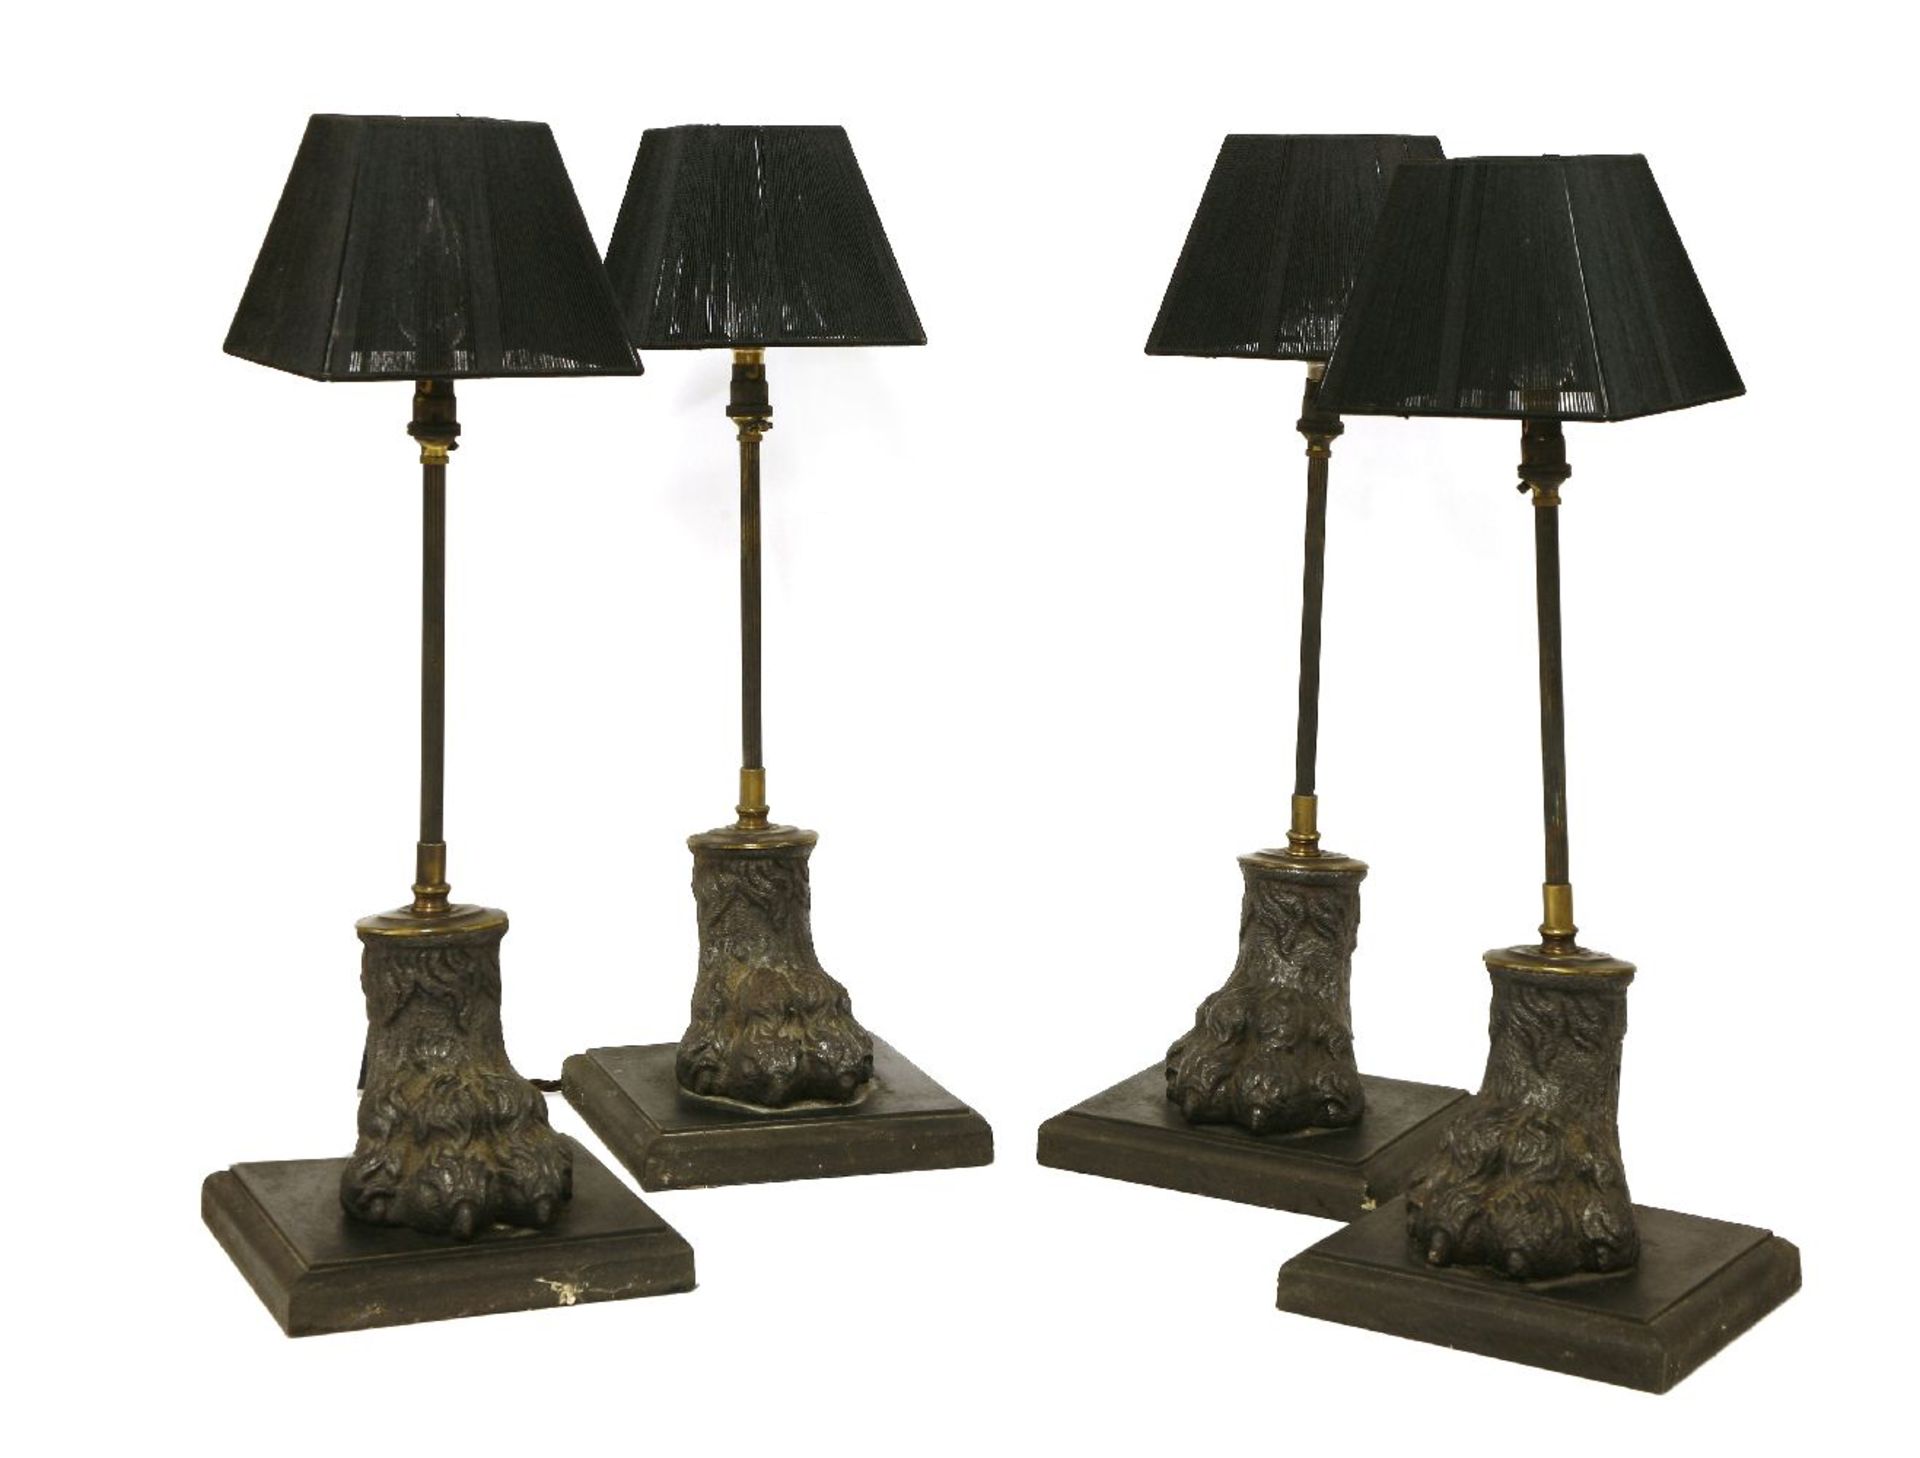 A set of four table lamps, each with a slender reeded support, on cast metal hairy paw feet and